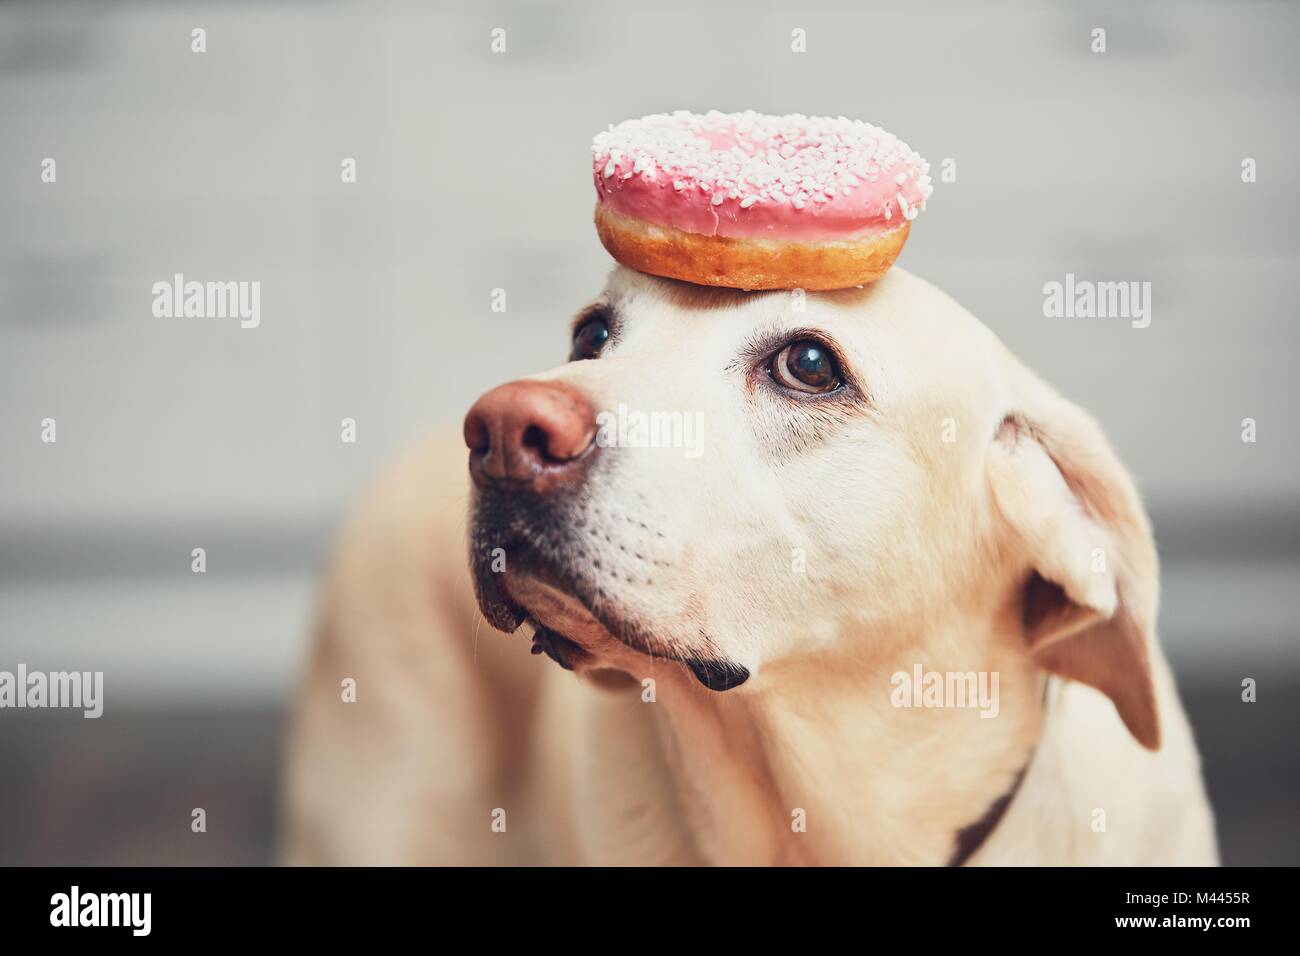 Funny portrait of the cute dog in the home kitchen. Labrador retriever keeps donut on his head. Stock Photo